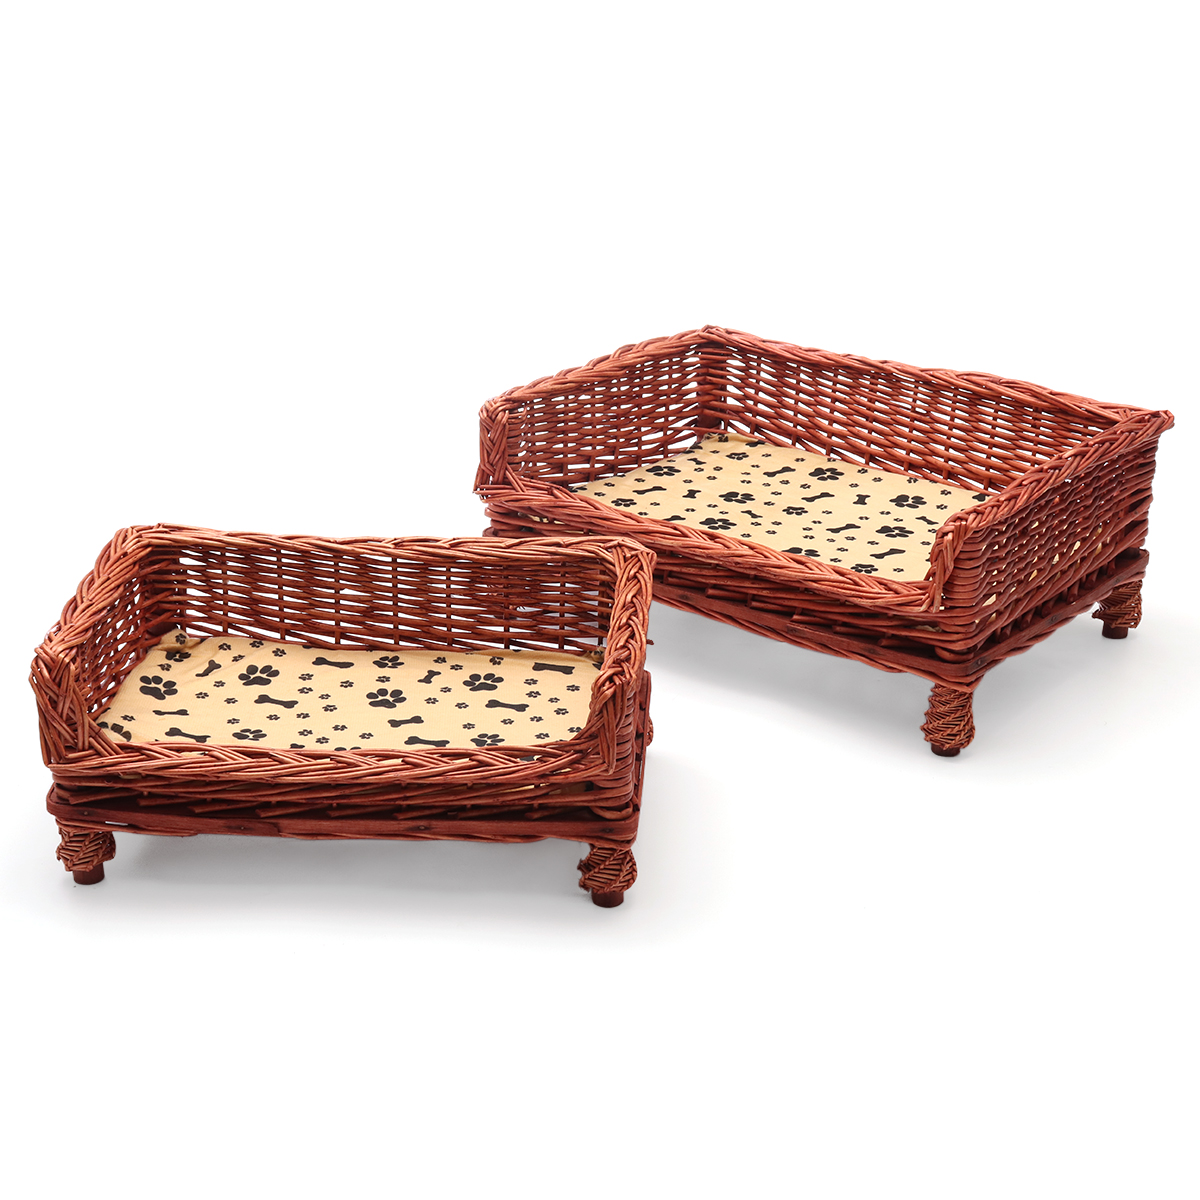 HAND-WOVEN-Wicker-Pet-Bed-Dog-Cat-Basket-Shabby-Chic-Sleeping-Durable-Washable-1640468-5